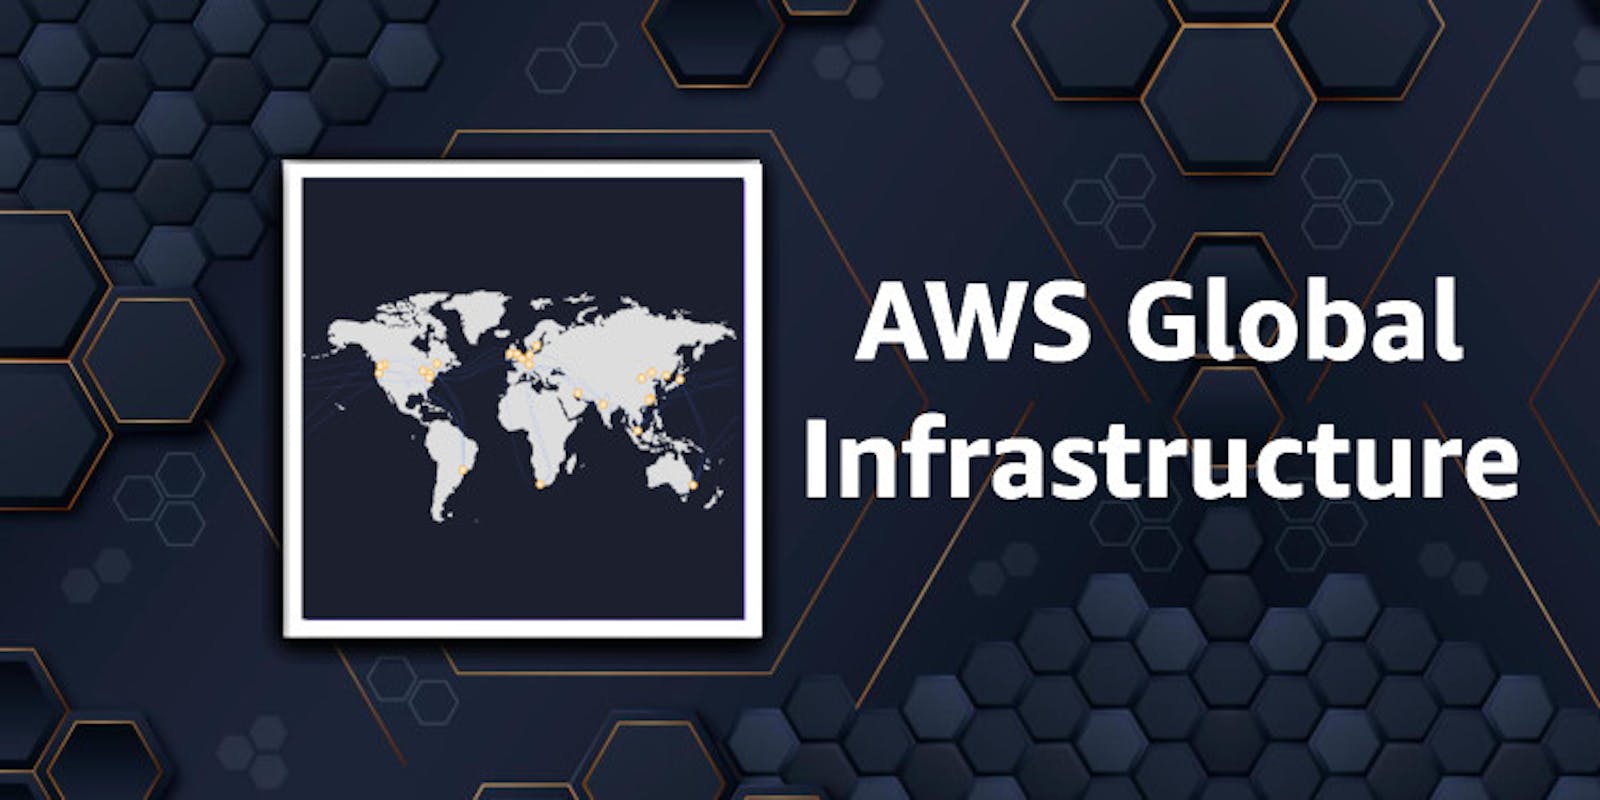 All you need to know about AWS Global Infrastructure